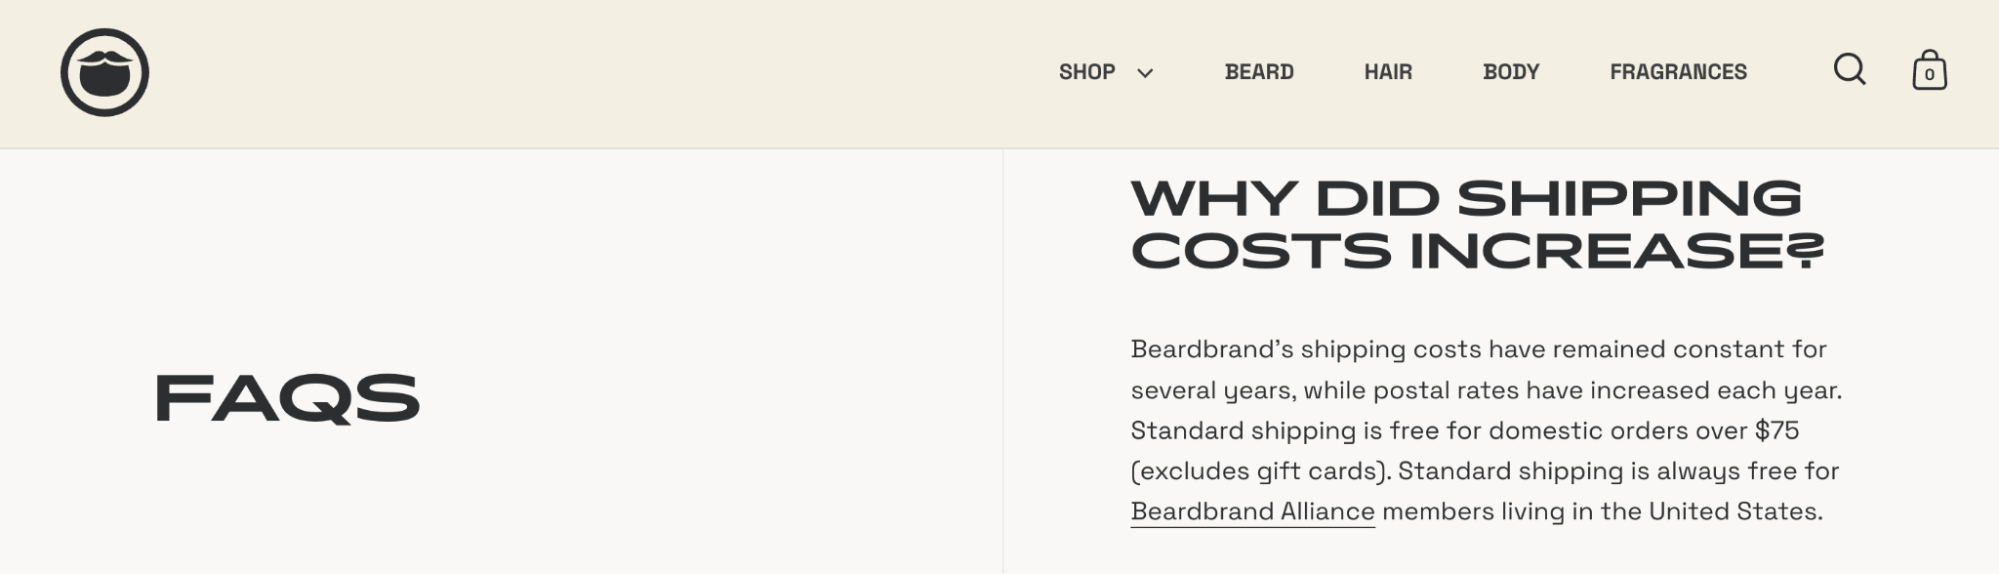 Beardbrand’s FAQ page, answering the question, “Why did shipping costs increase?”